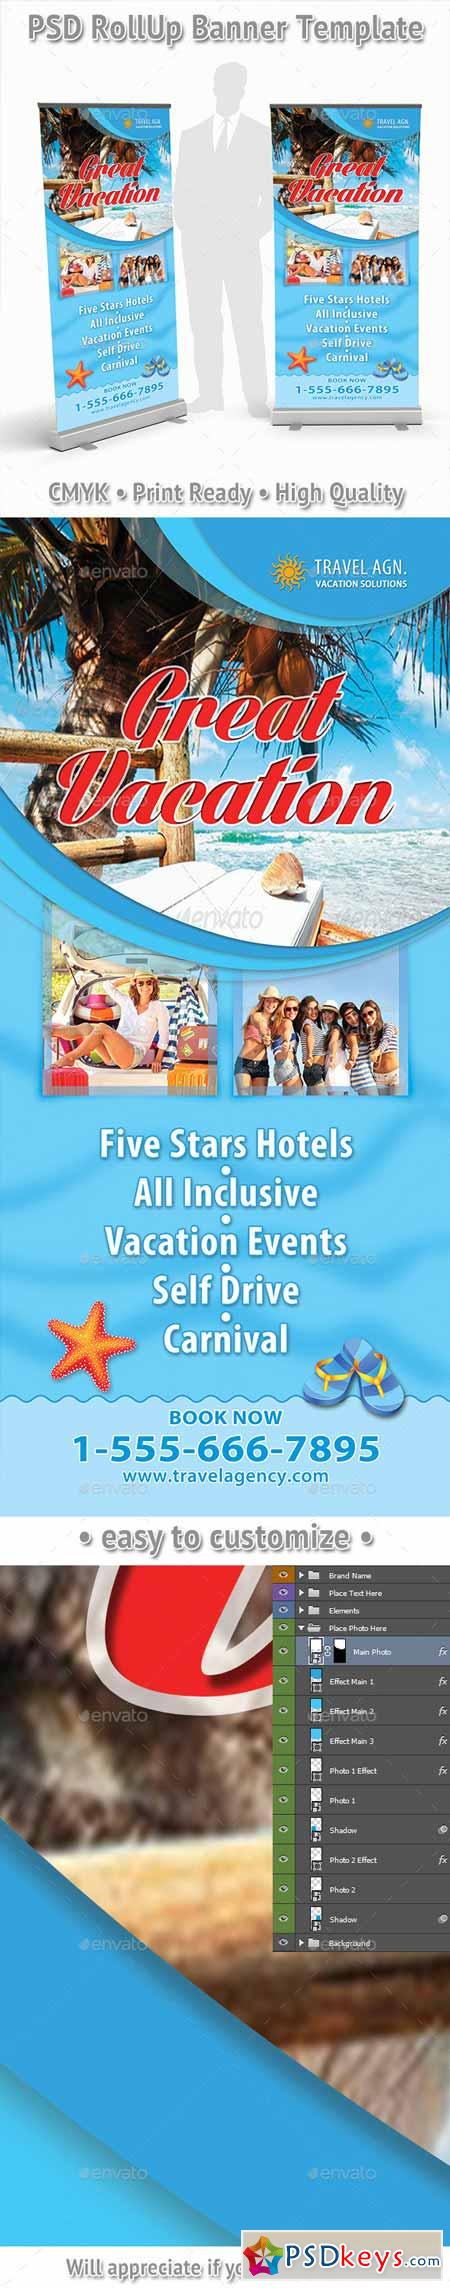 Travel Agency Vacation Rollup Banner 54 11707011